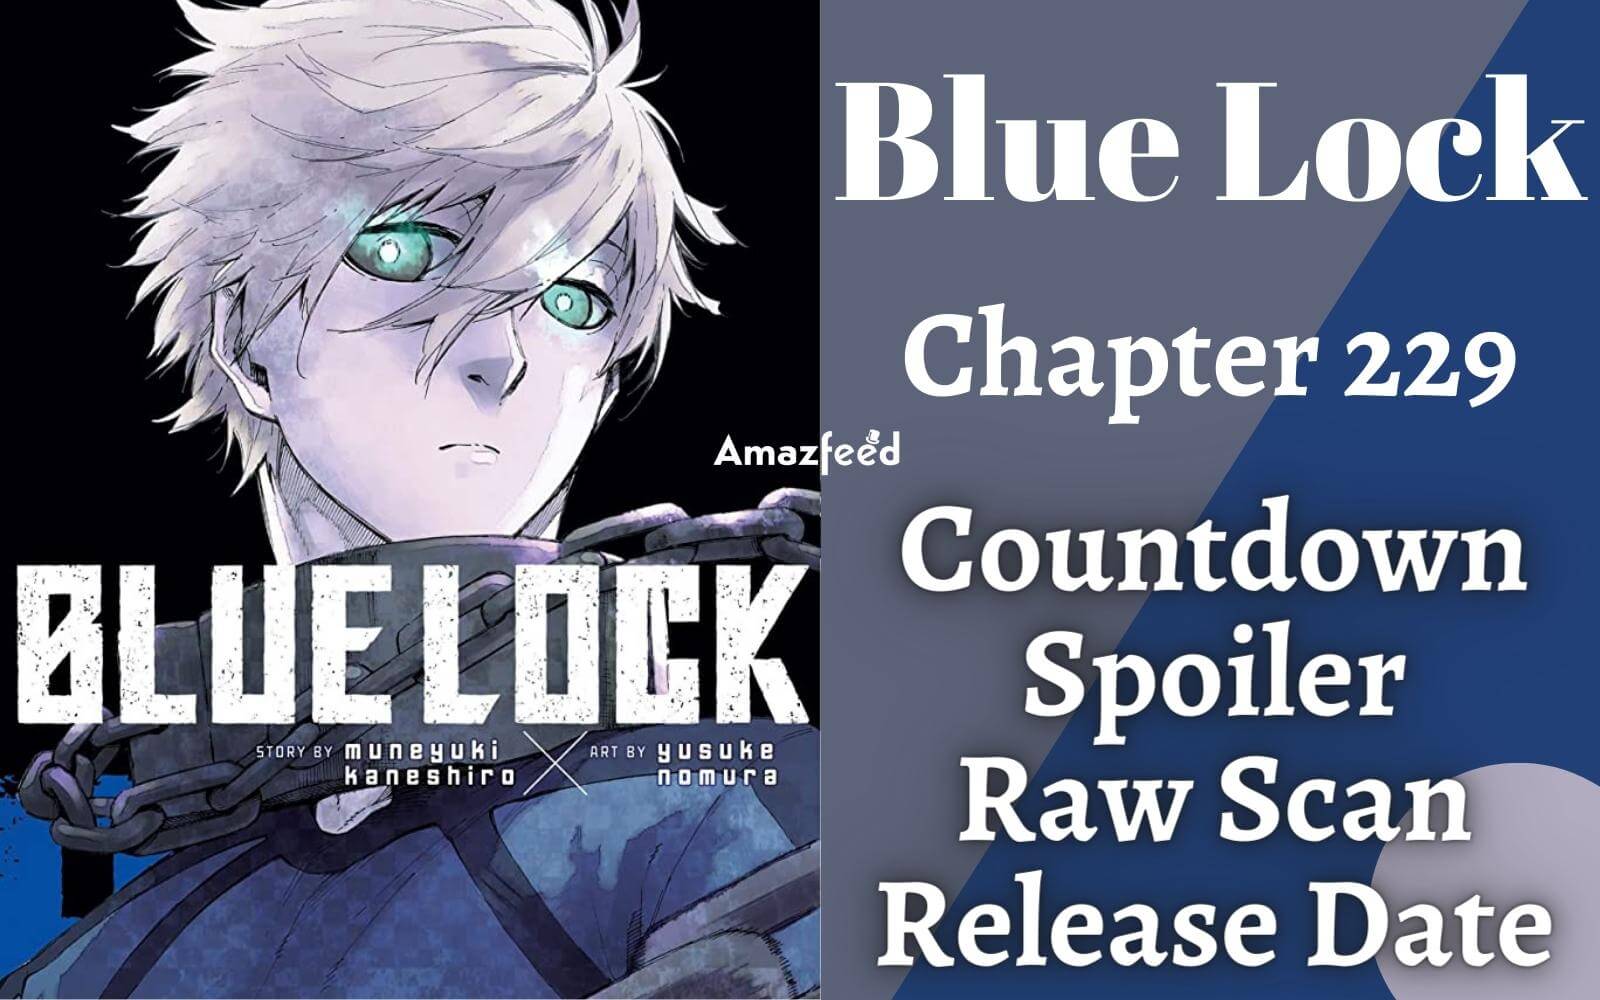 Blue Lock chapter 229: Blue Lock chapter 229: Release date, time, what to  expect and more; Check details here - The Economic Times